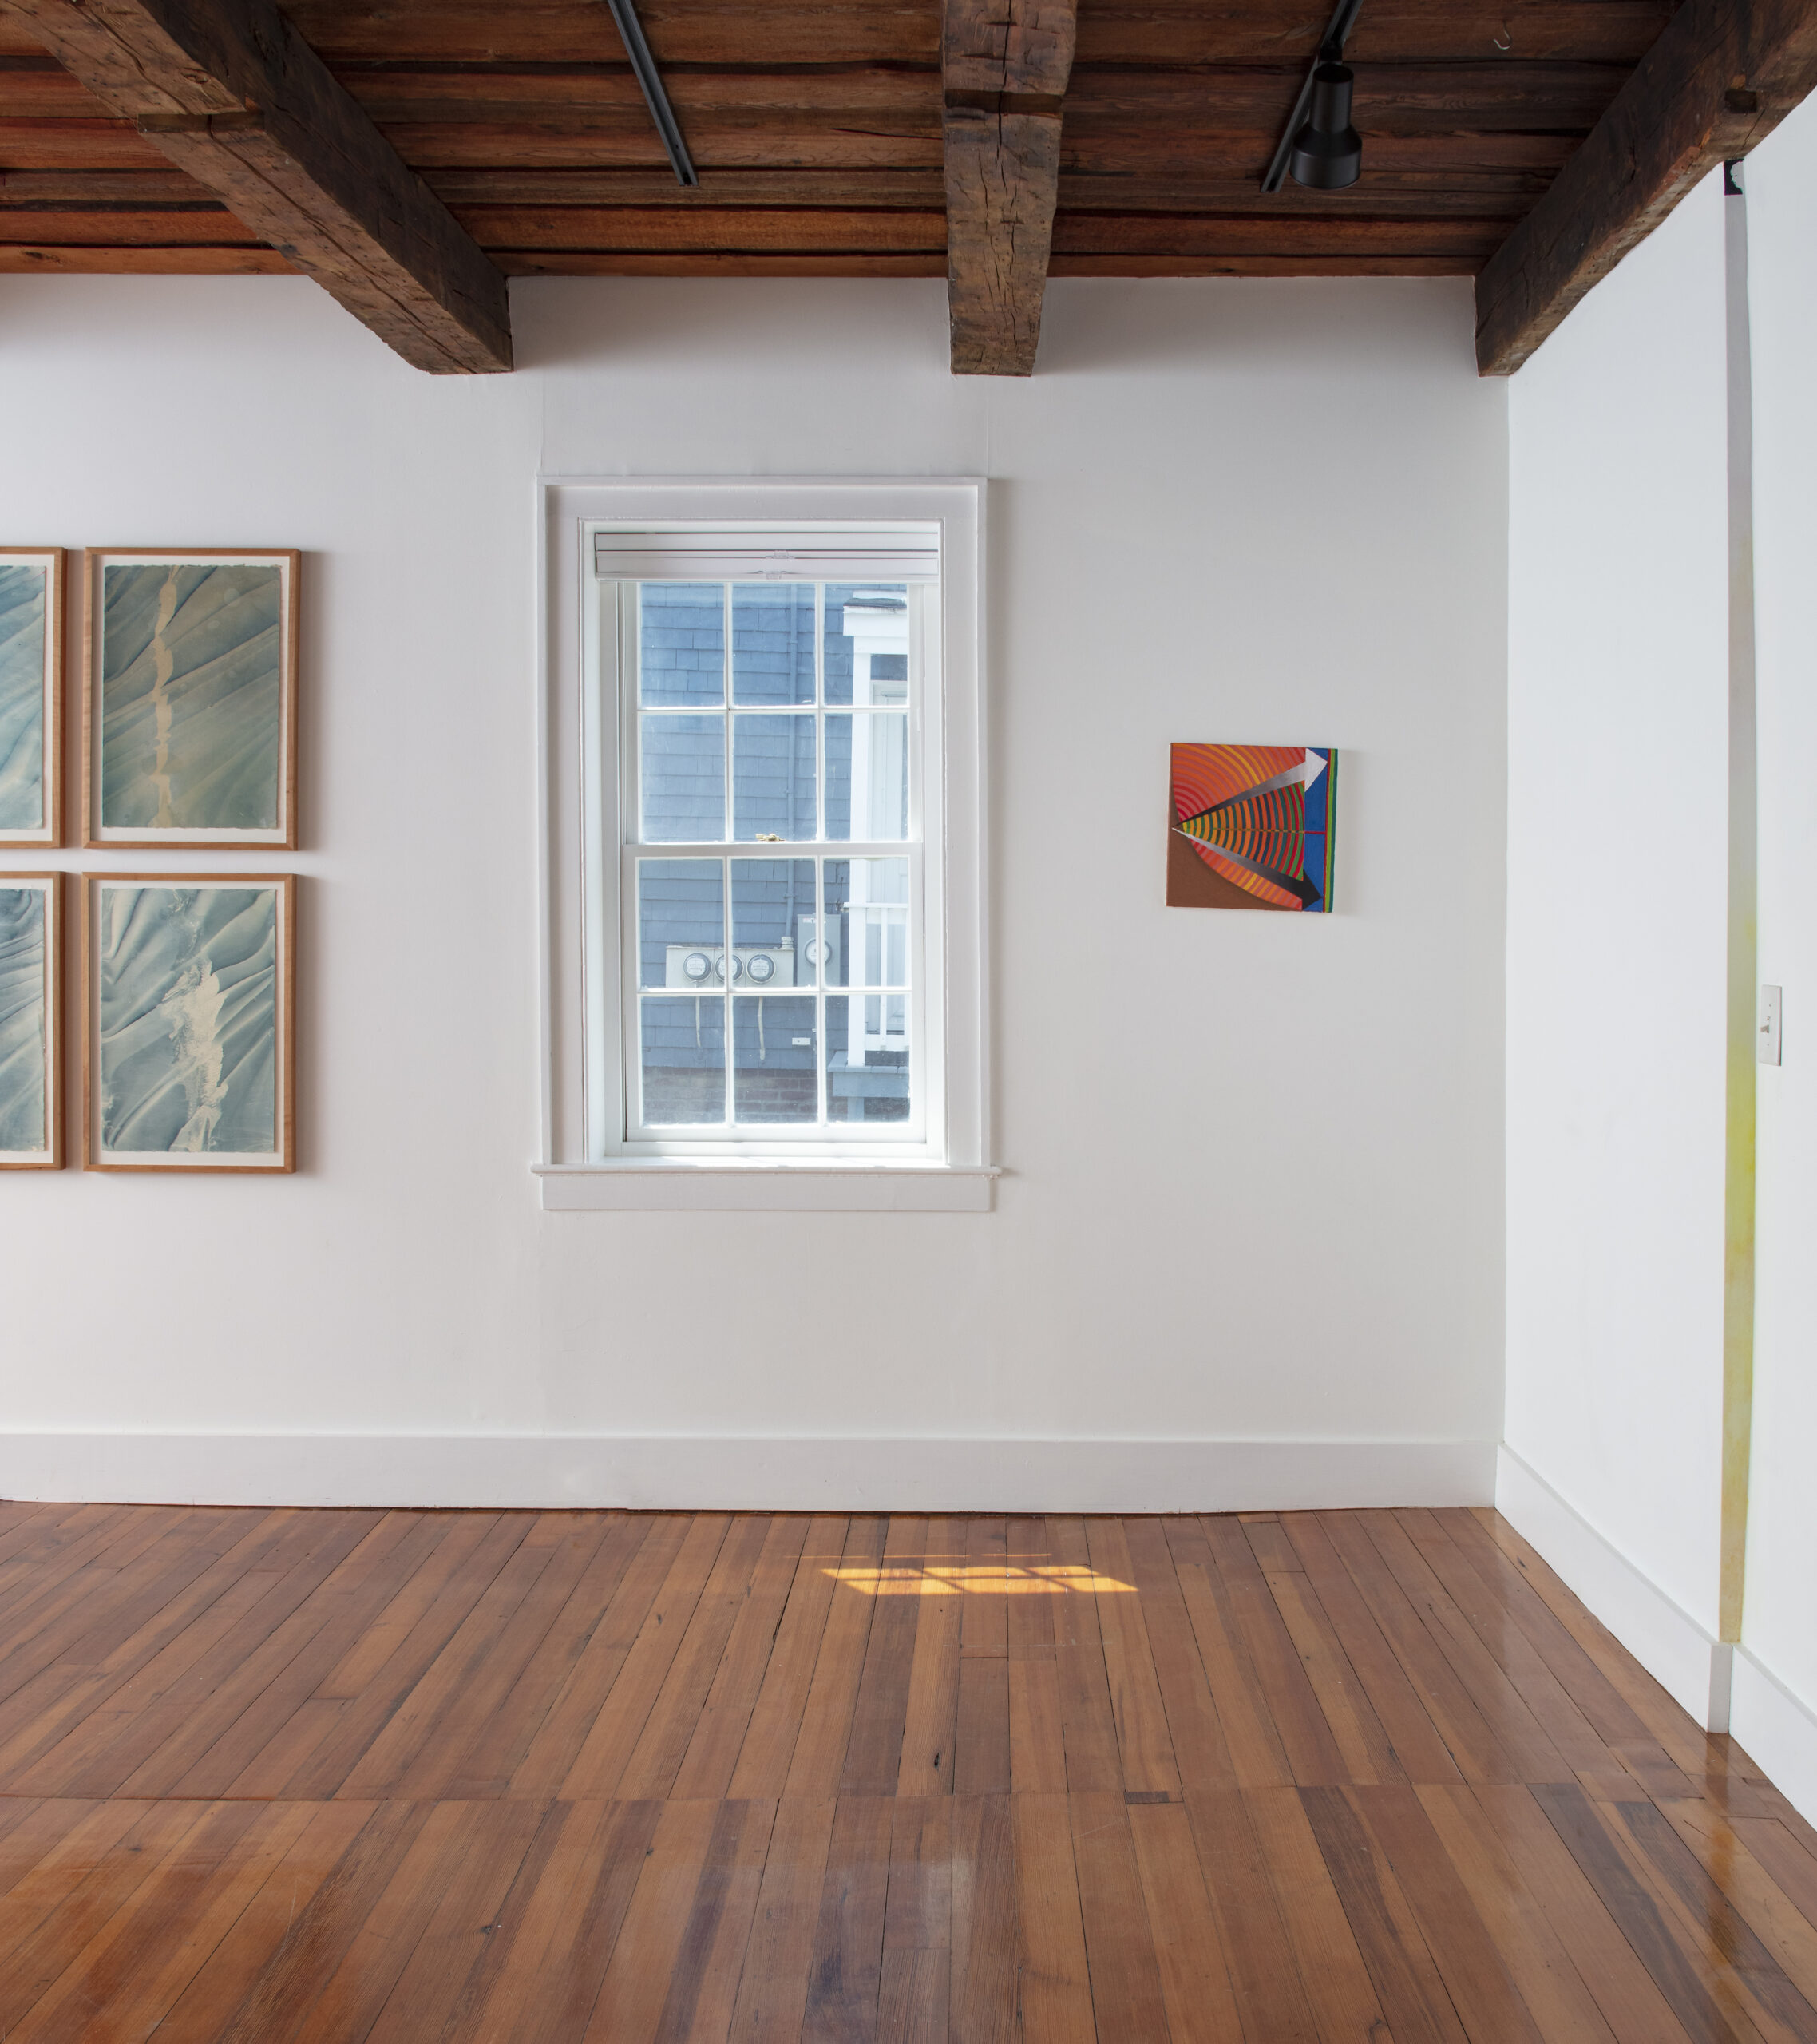 Installation view, At Finger's End, works by Rina Goldfield and Michael Cuadrado.